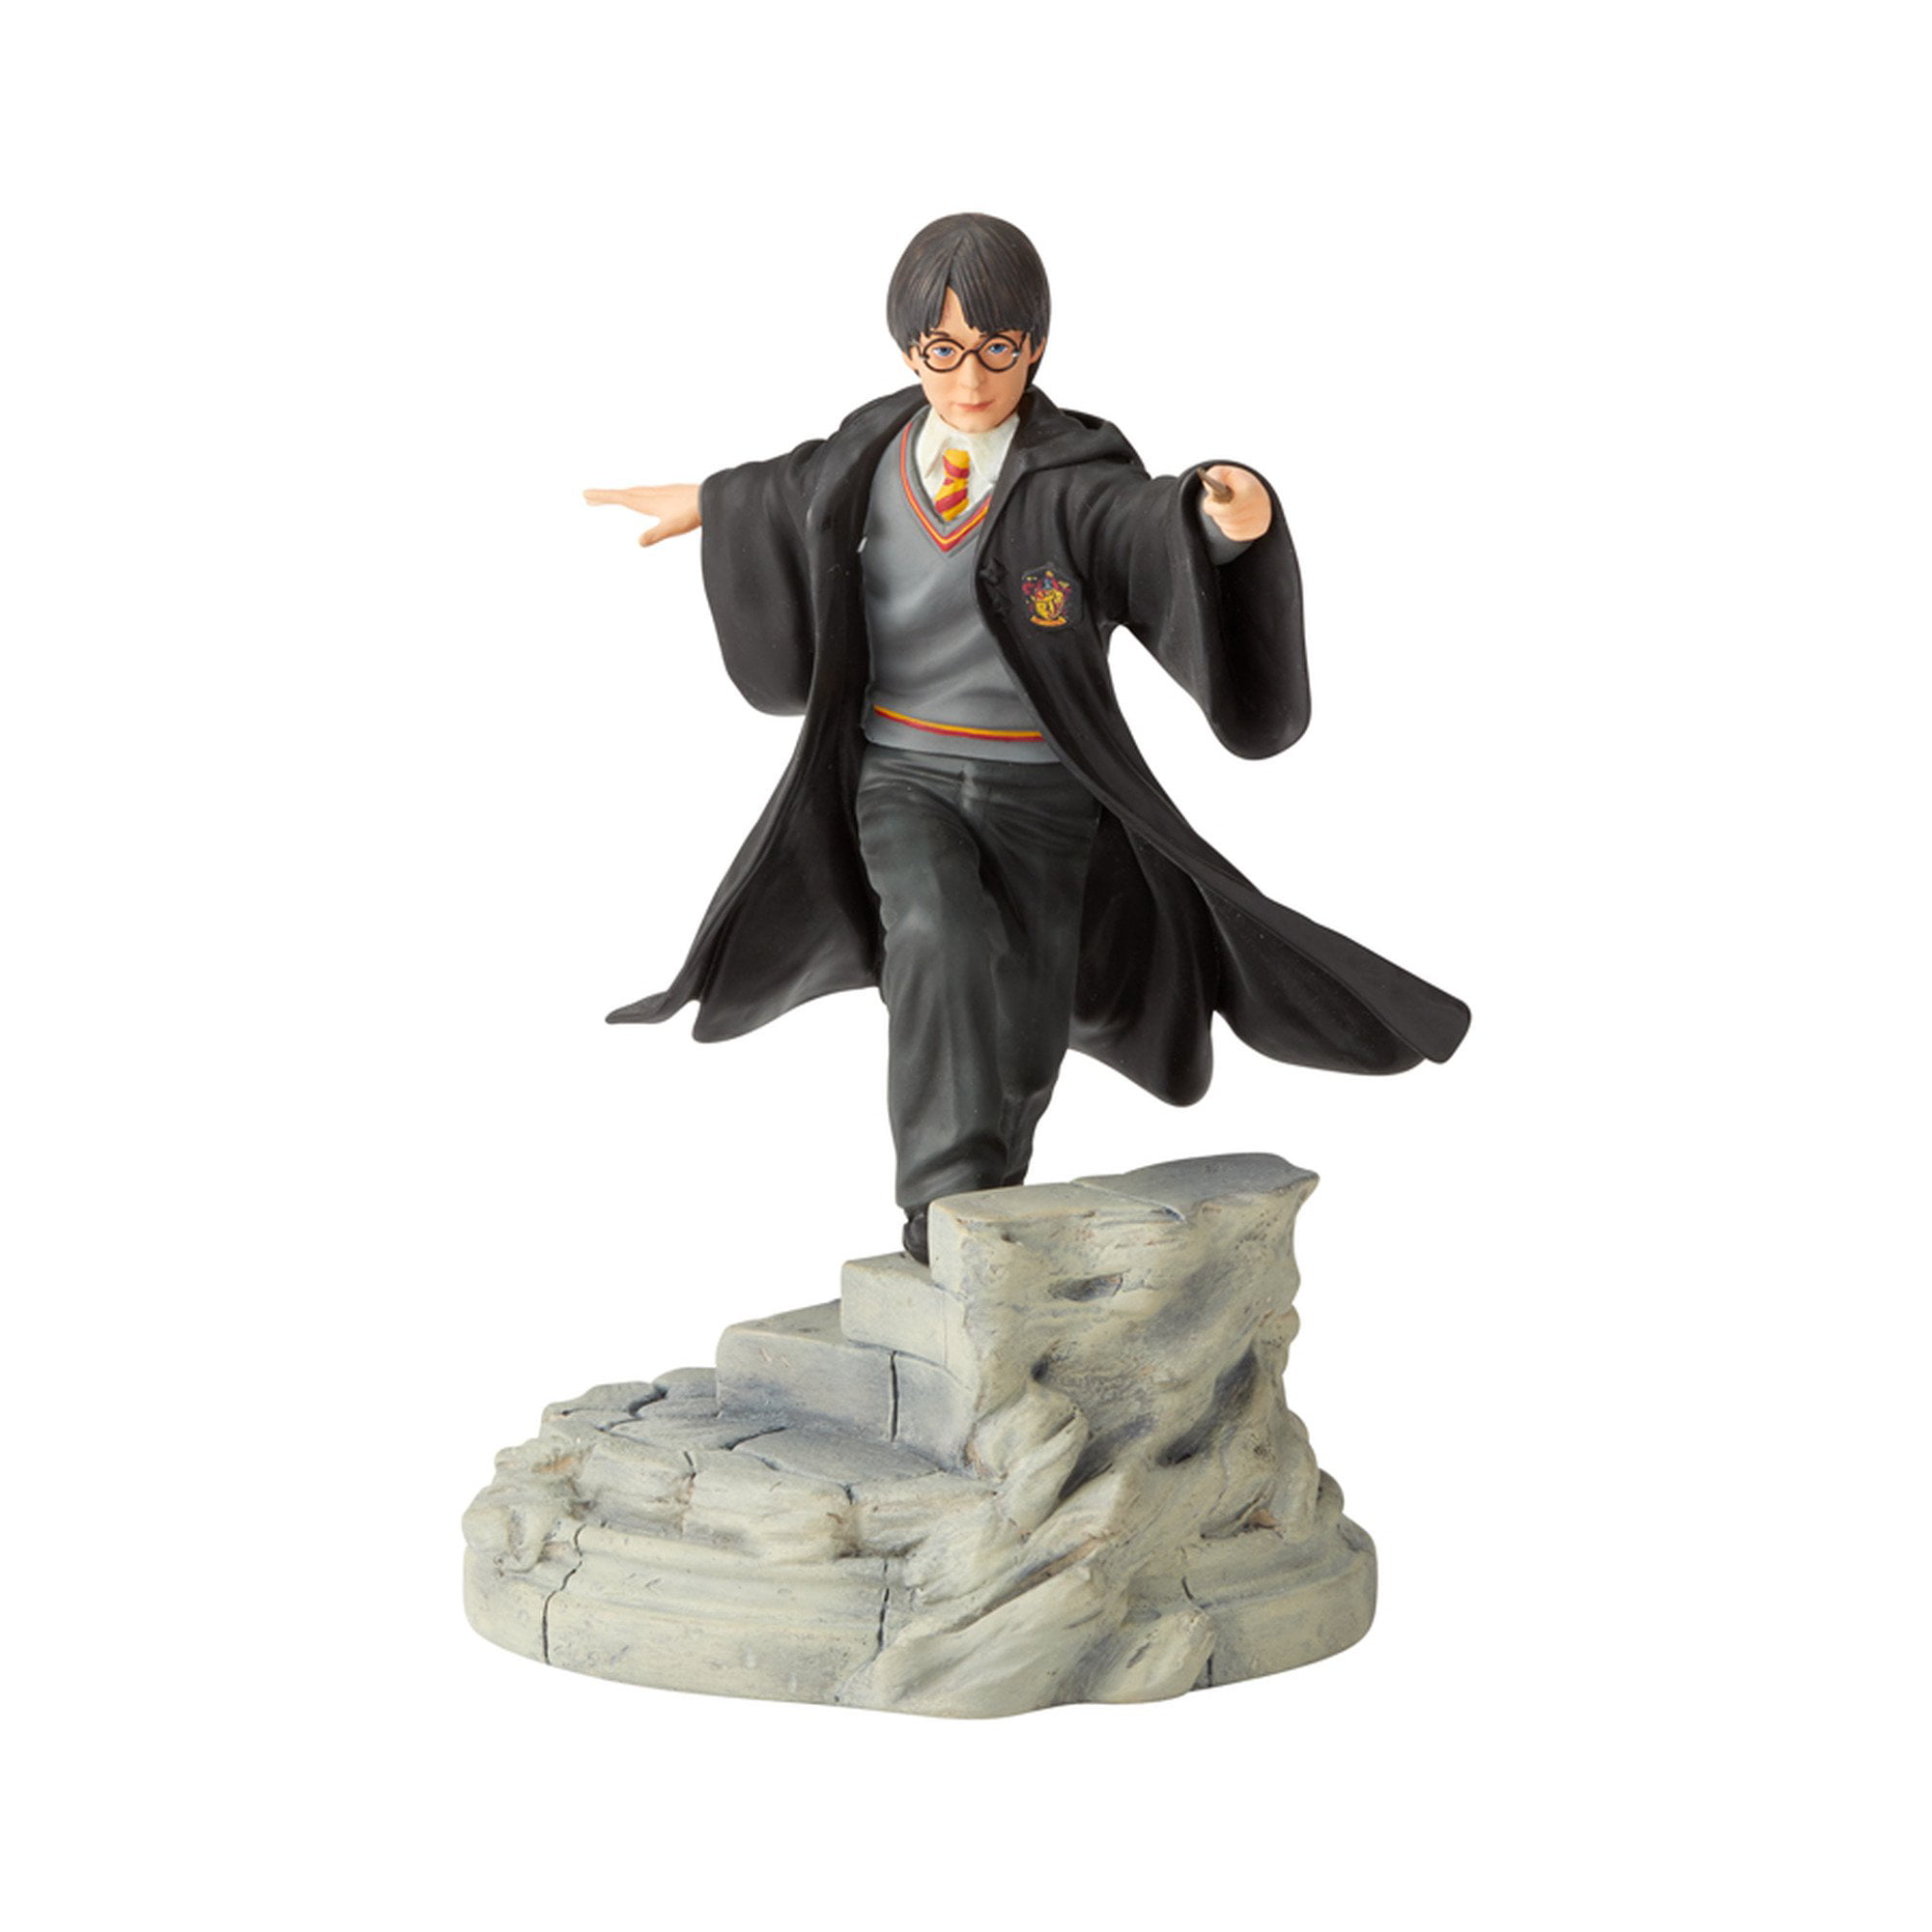 Details about   Harry Potter Year One Figurine by Enesco6003638 